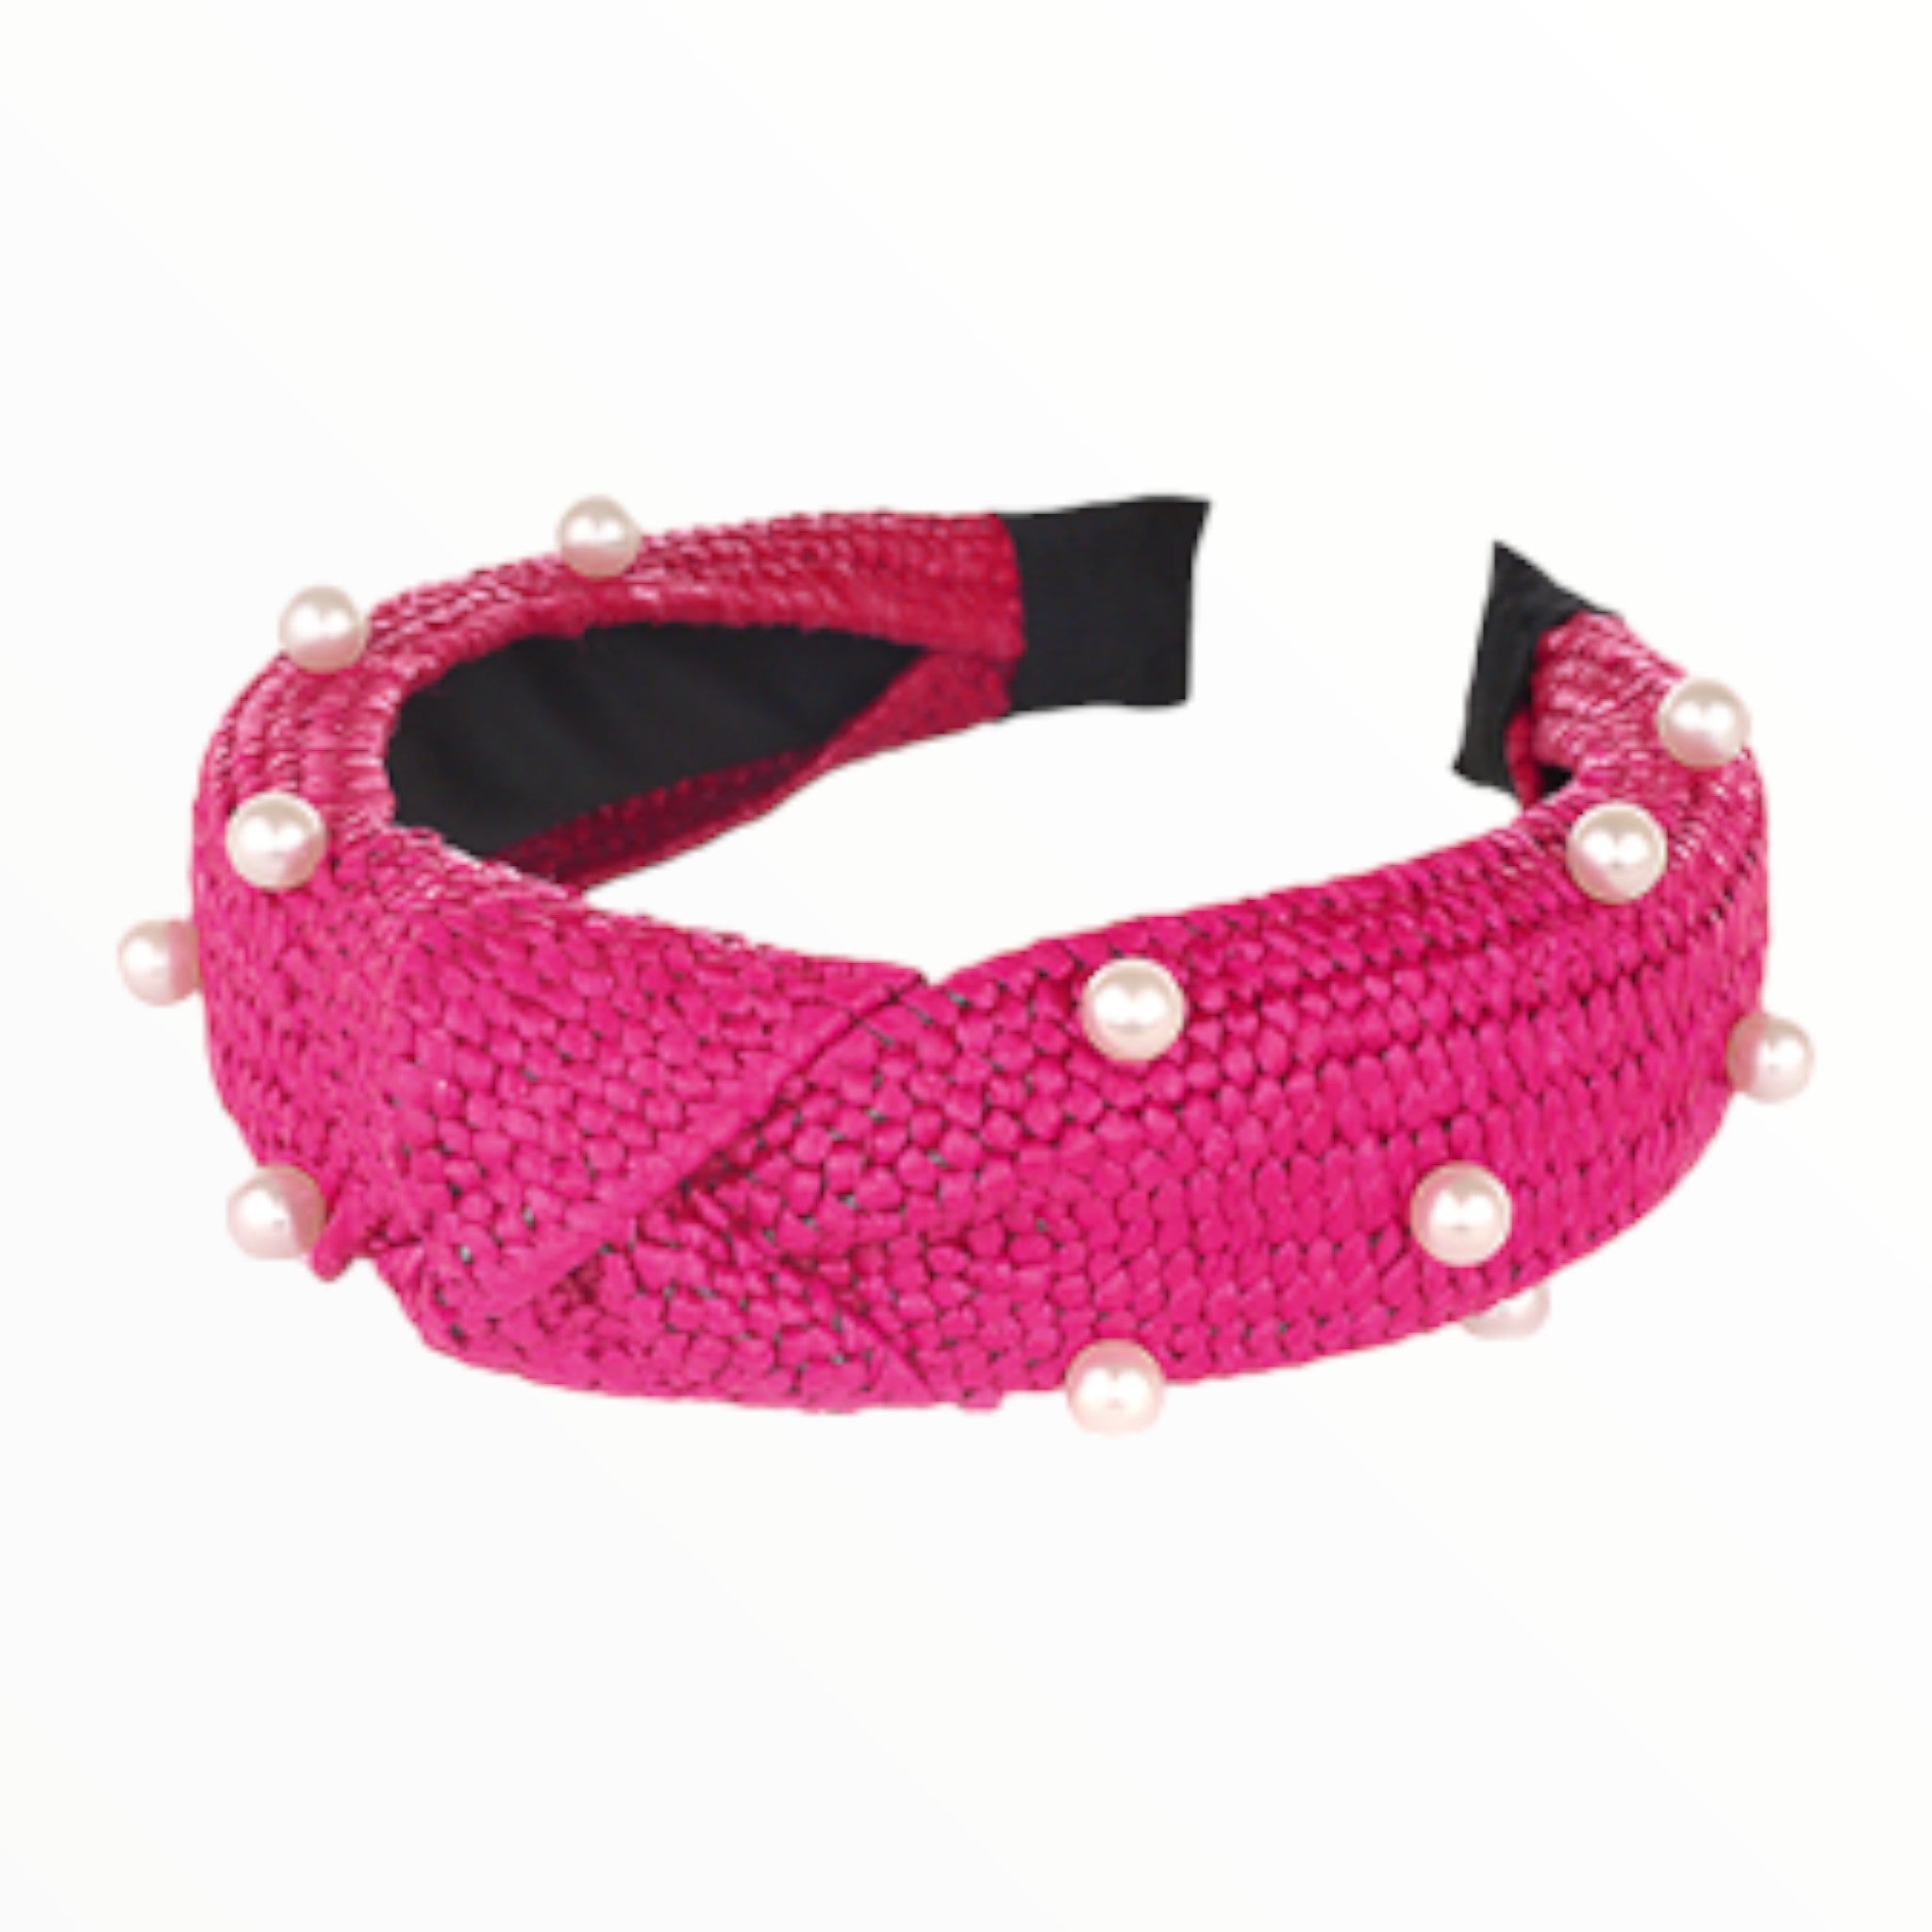 Fuchsia Pearl Embellished Top Knot Headband-Accessories-LouisGeorge Boutique-LouisGeorge Boutique, Women’s Fashion Boutique Located in Trussville, Alabama